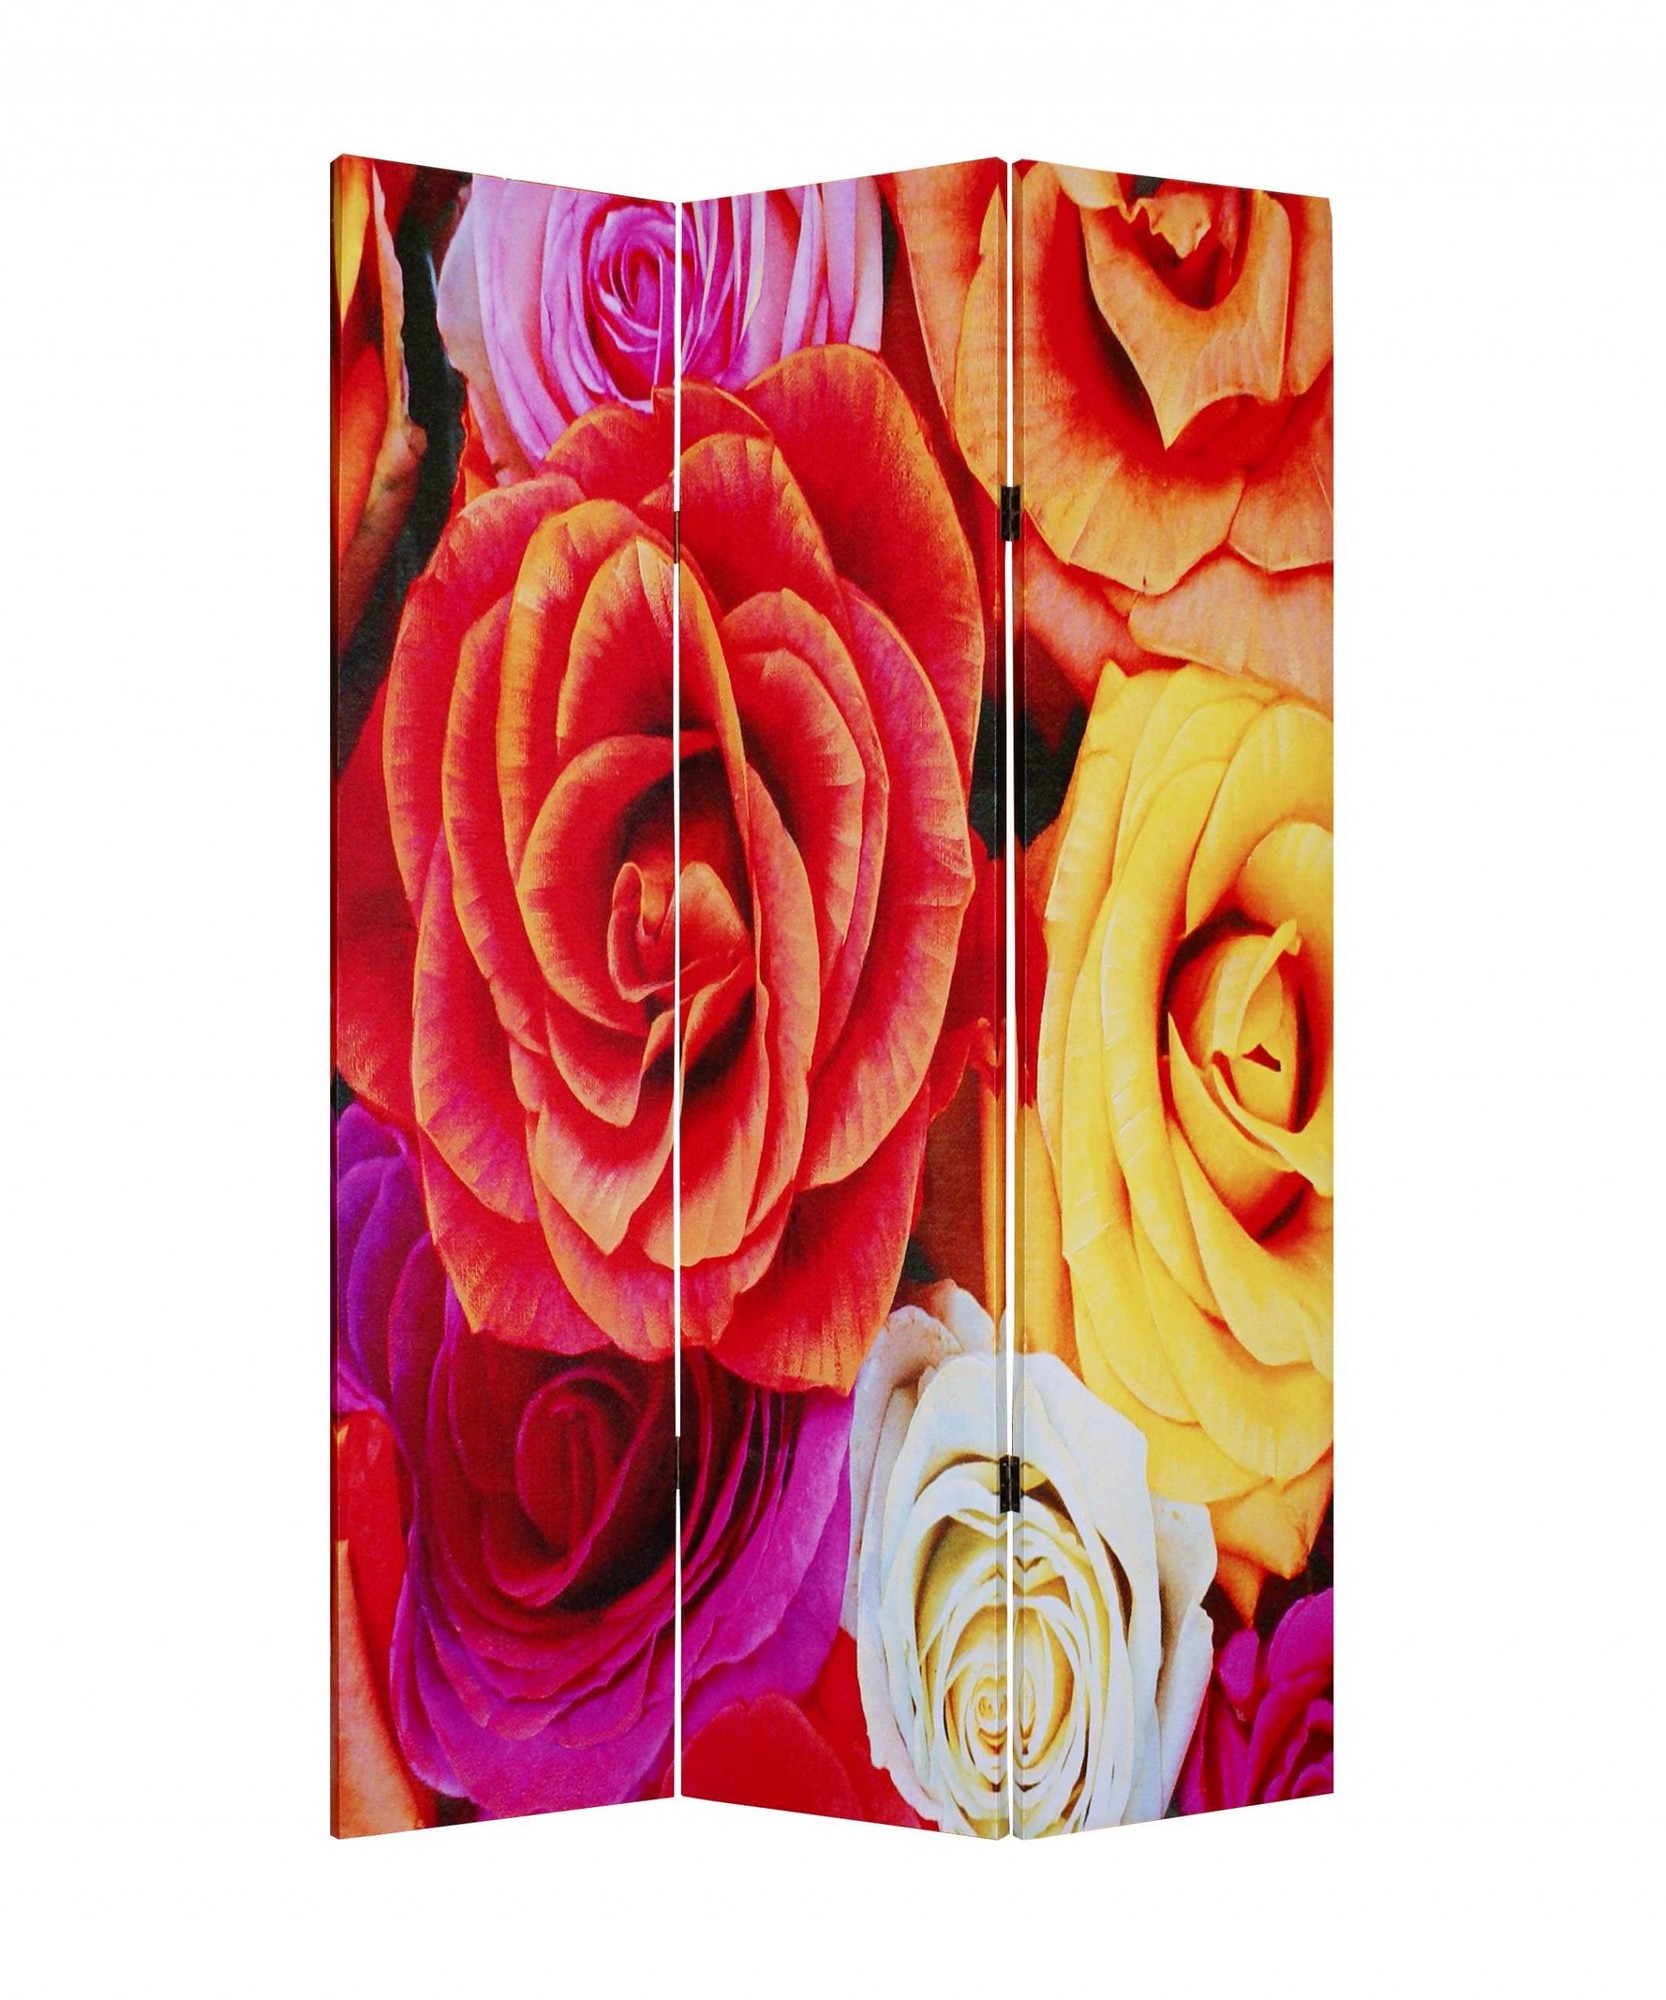 1" x 48" x 72" Multi Color Wood Canvas Daisy And Rose Screen